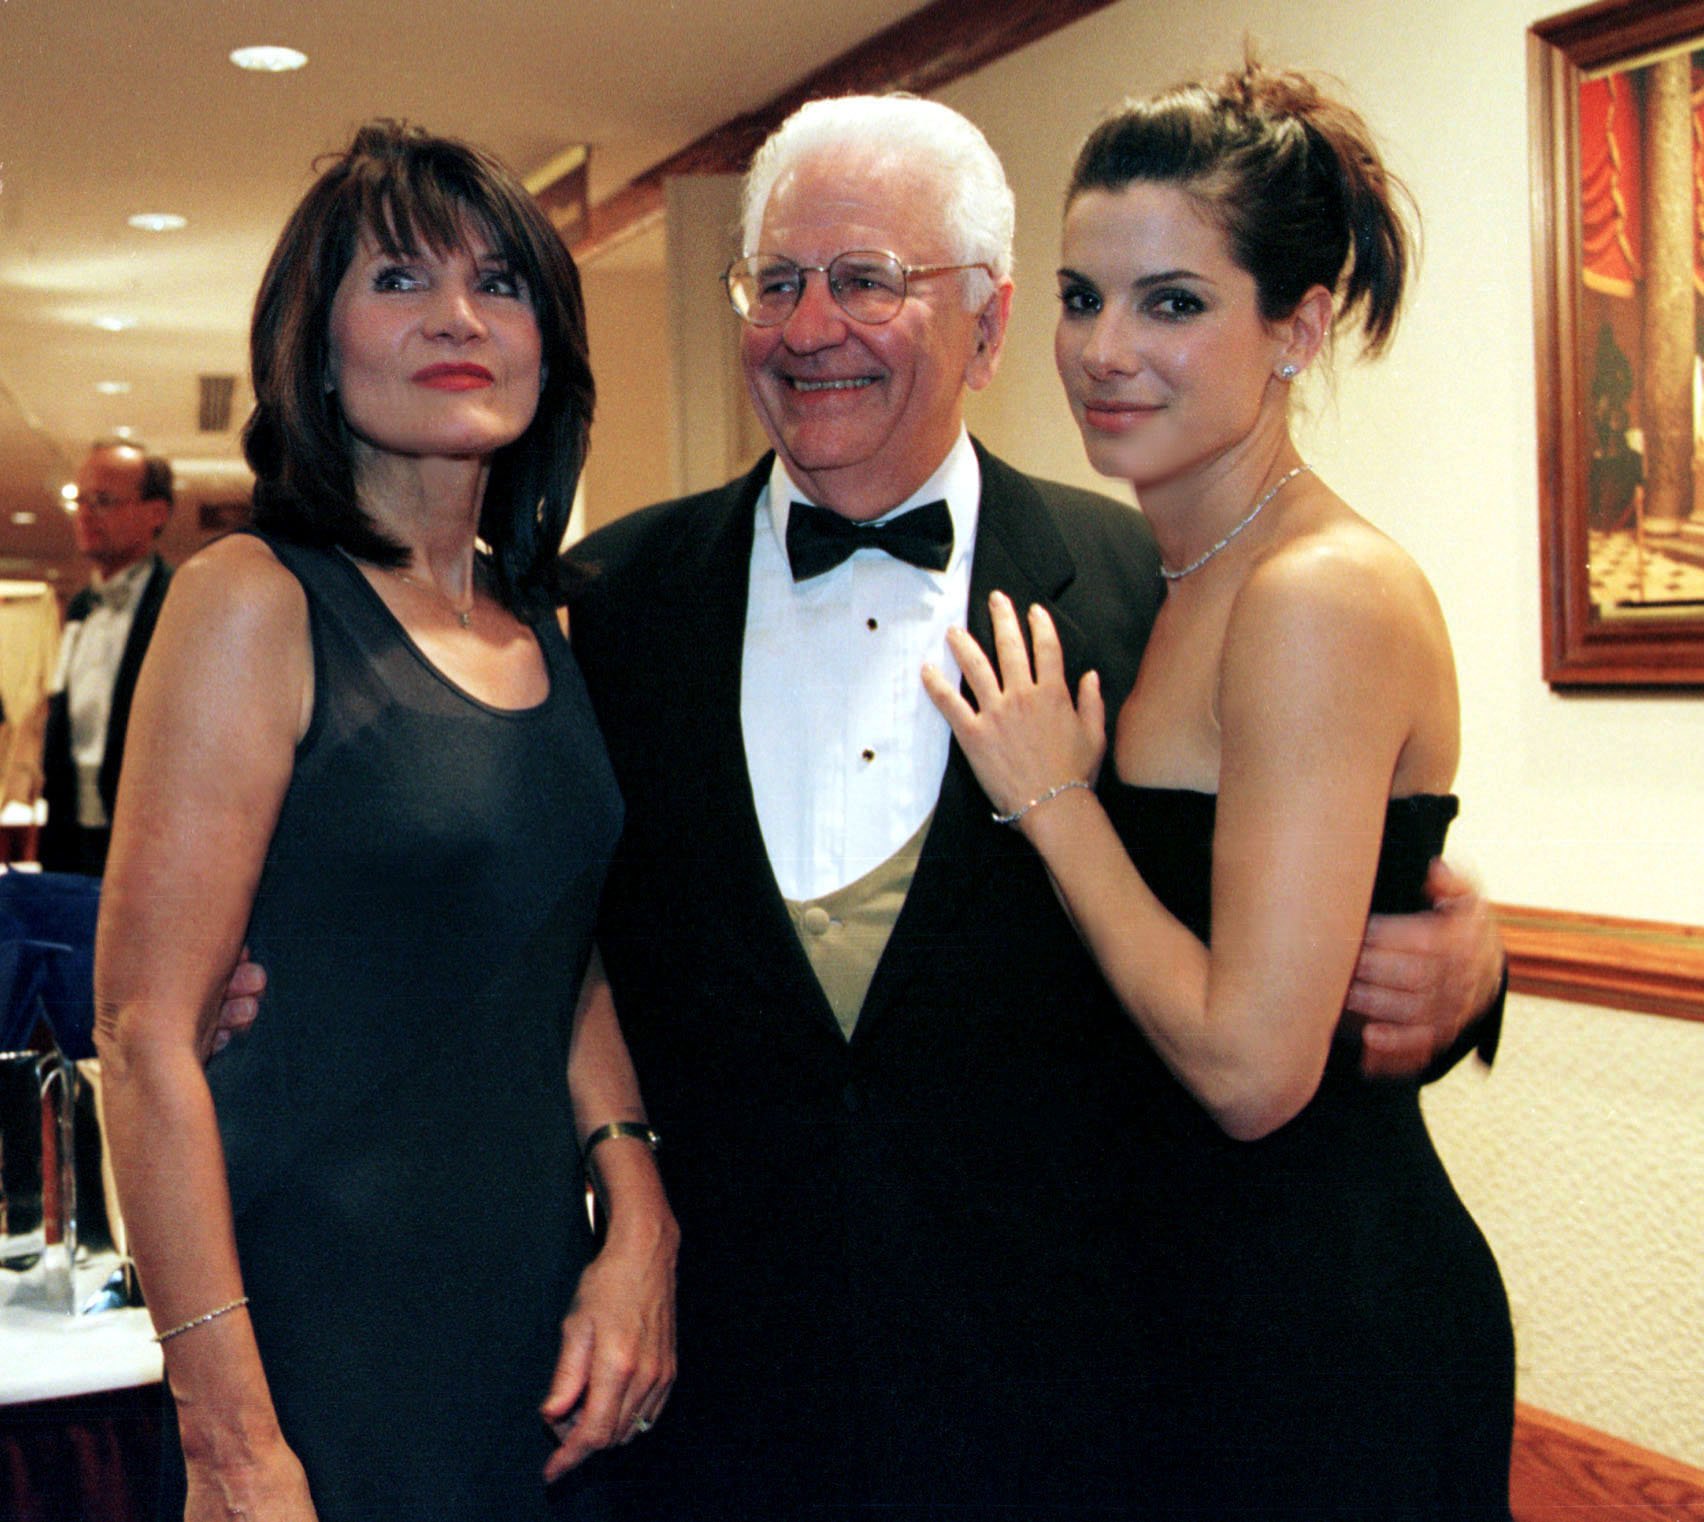 Sandra Bullock (R) with her parents Helga and John at the Lombardi Gala on October 3, 1998 in Washington, D.C. | Source: Getty Images